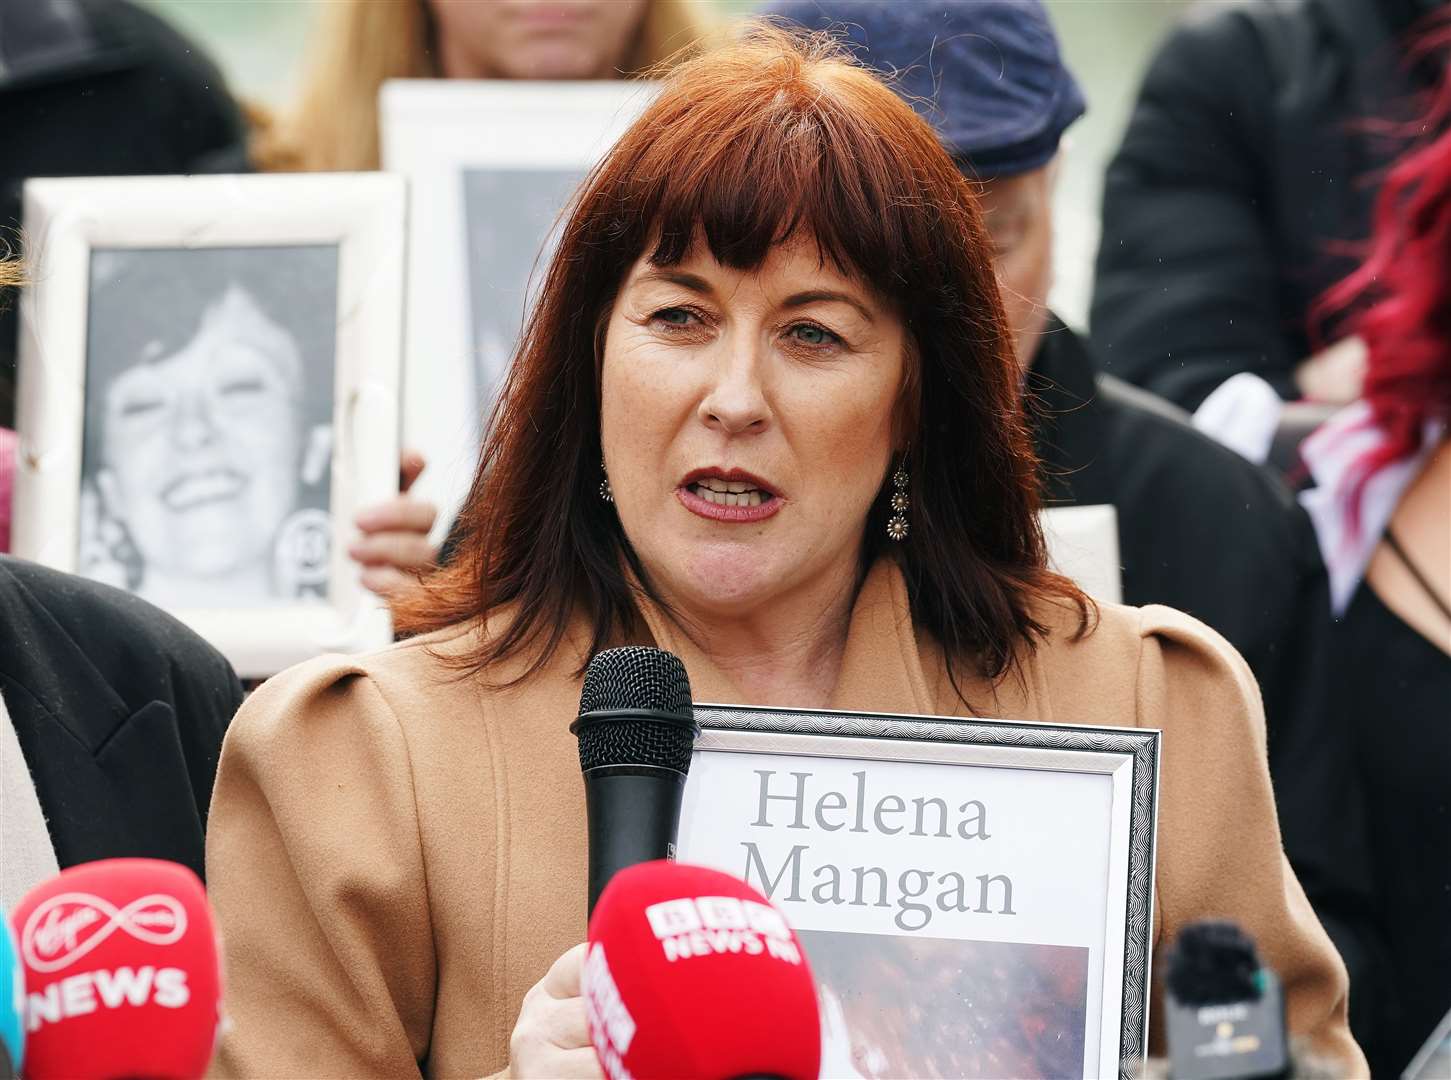 Samantha Mangan, whose mother Helena died in the blaze, attended every day of the inquests (Brian Lawless/PA)